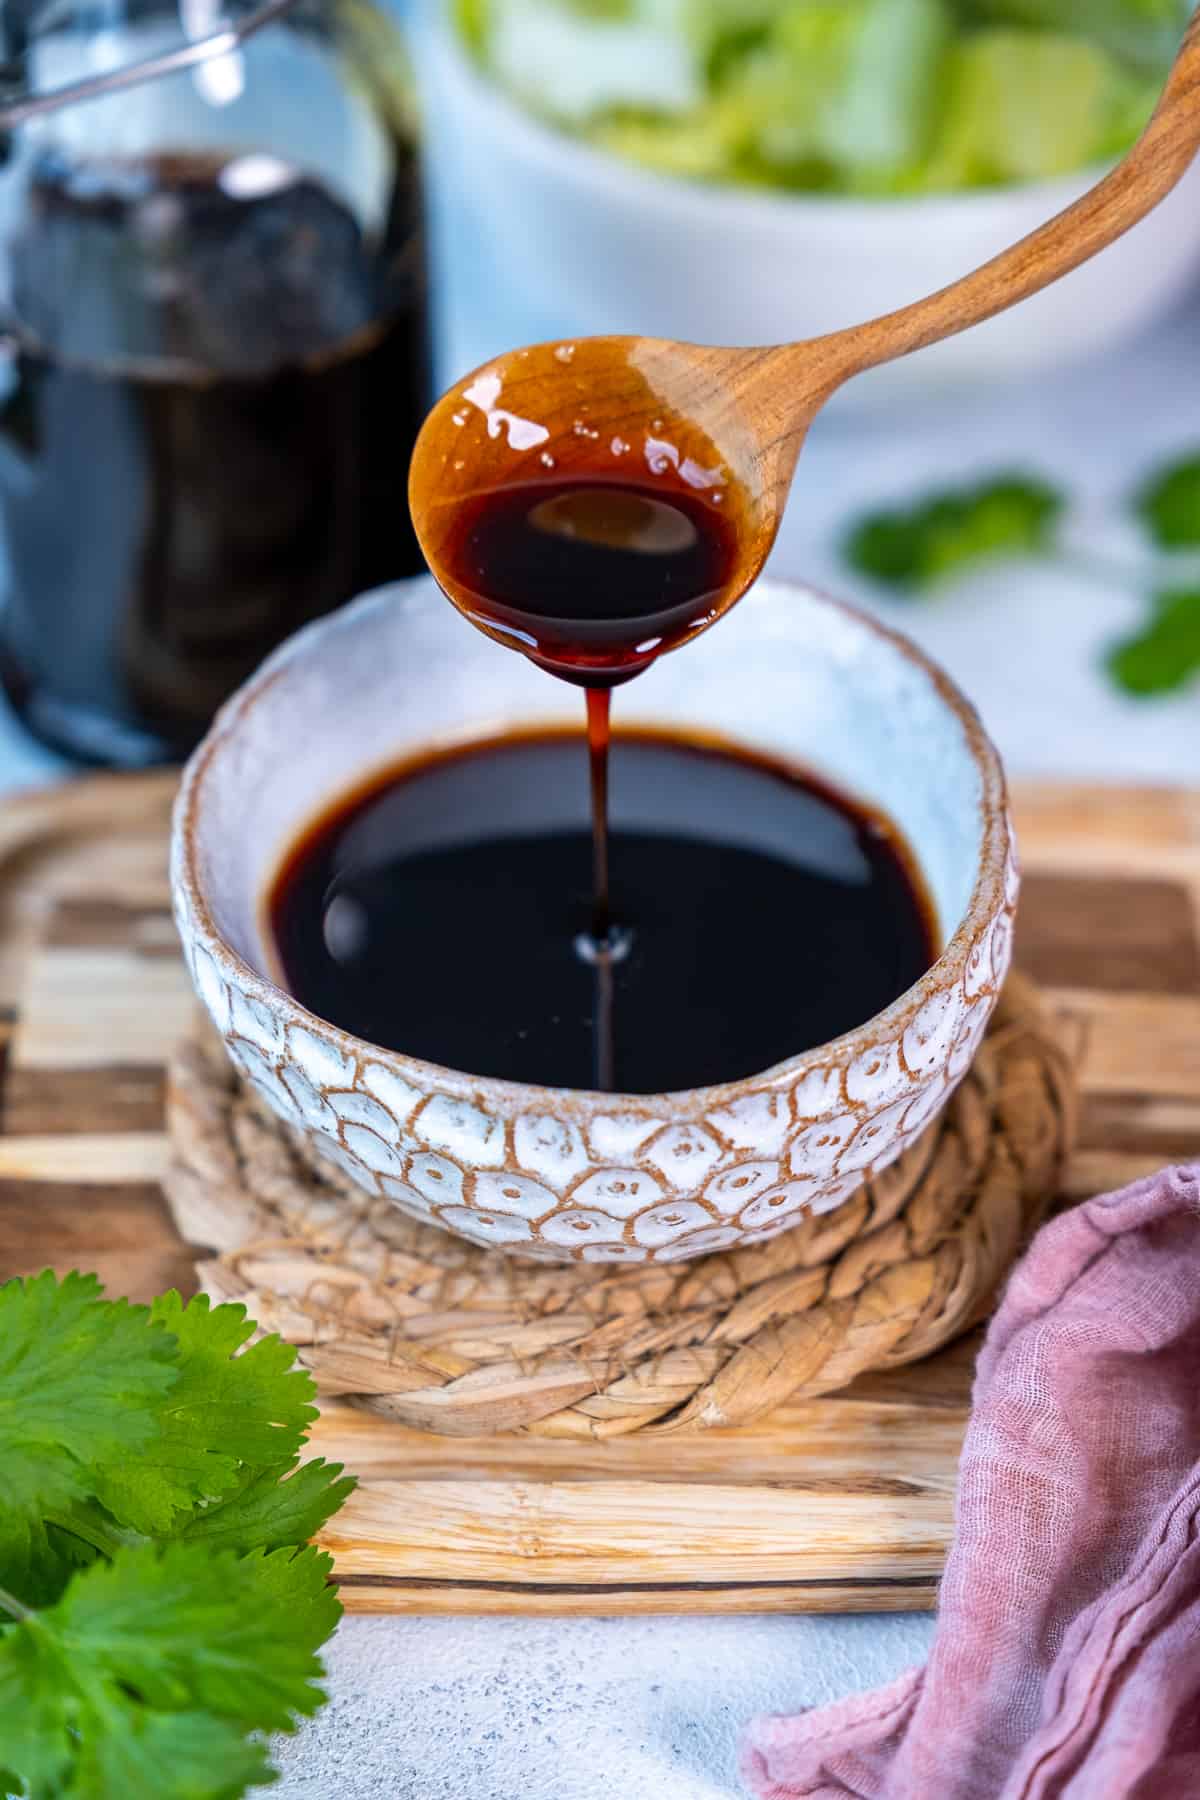 Balsamic vinegar in a white bowl and a wooden spoon pouring some of it.